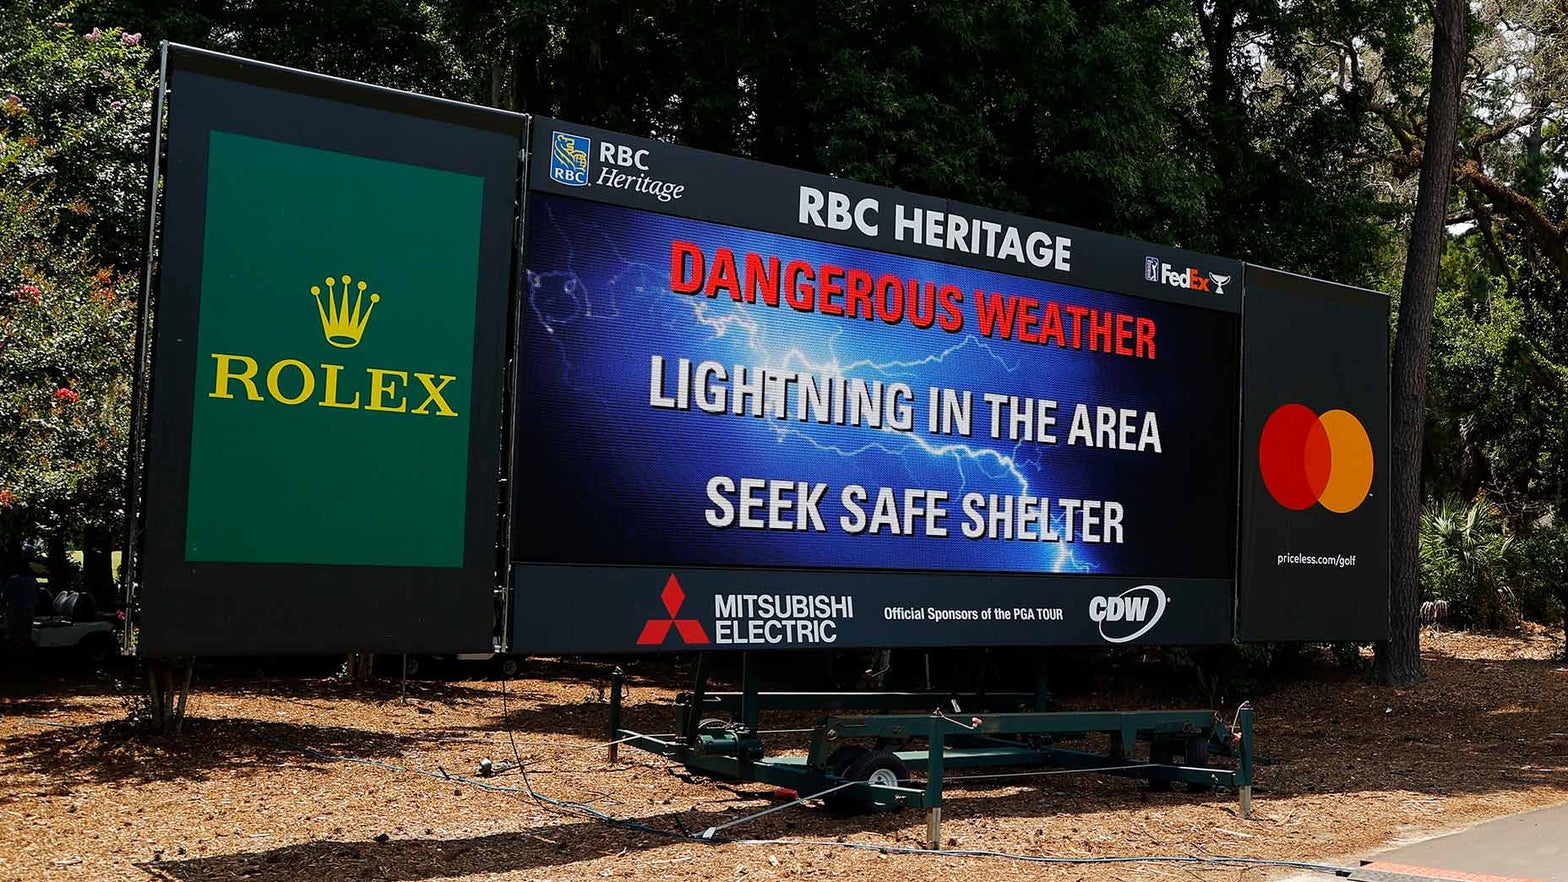 Final round of RBC Heritage suspended due to dangerous weather